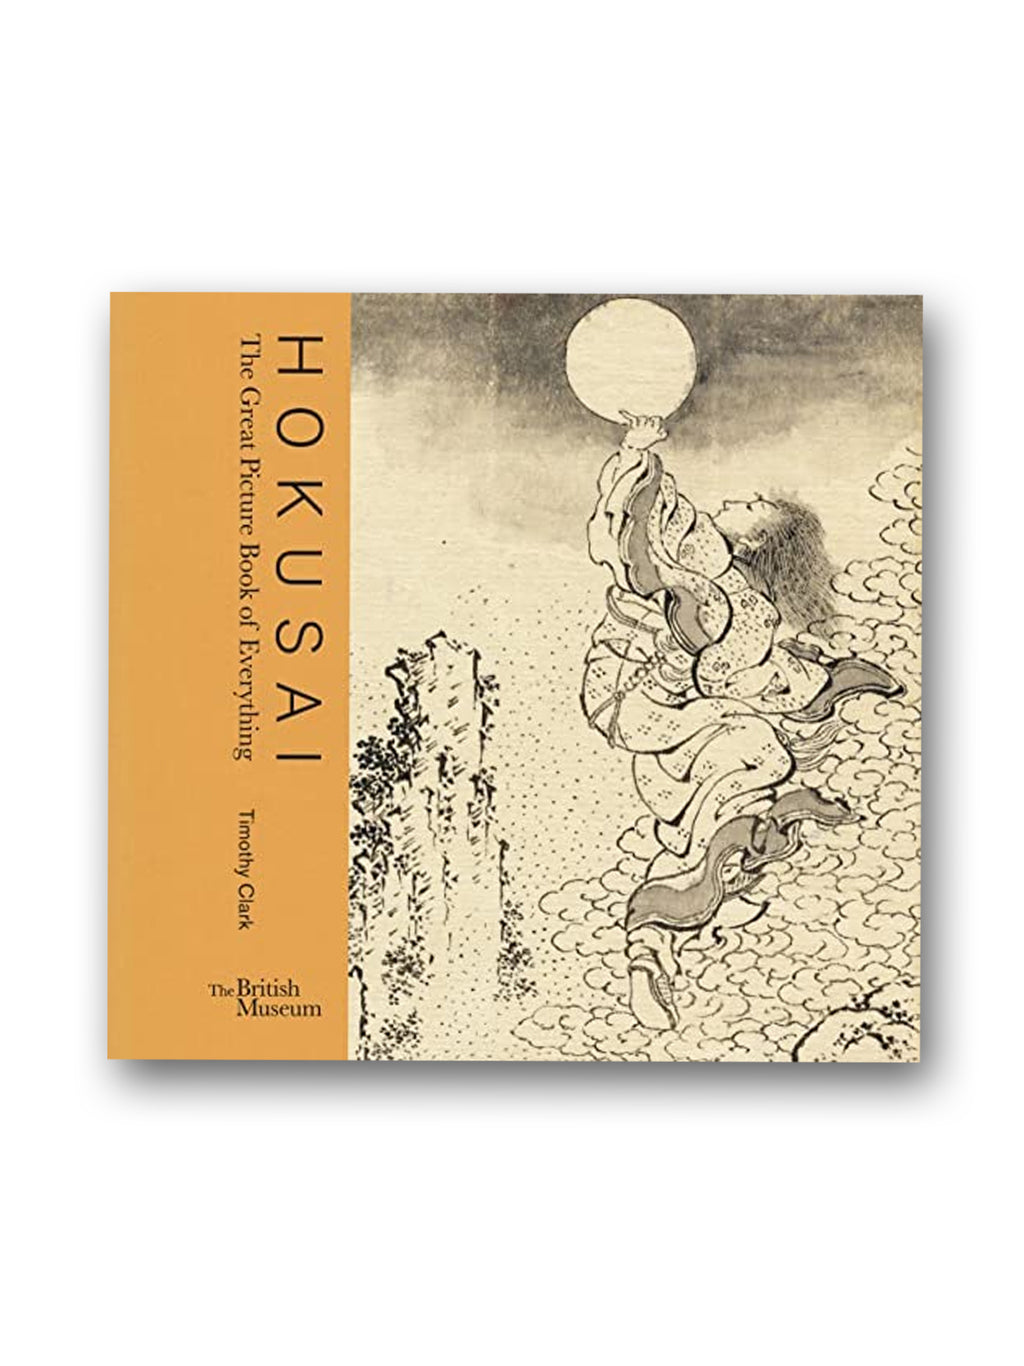 Hokusai : The Great Picture Book of Everything